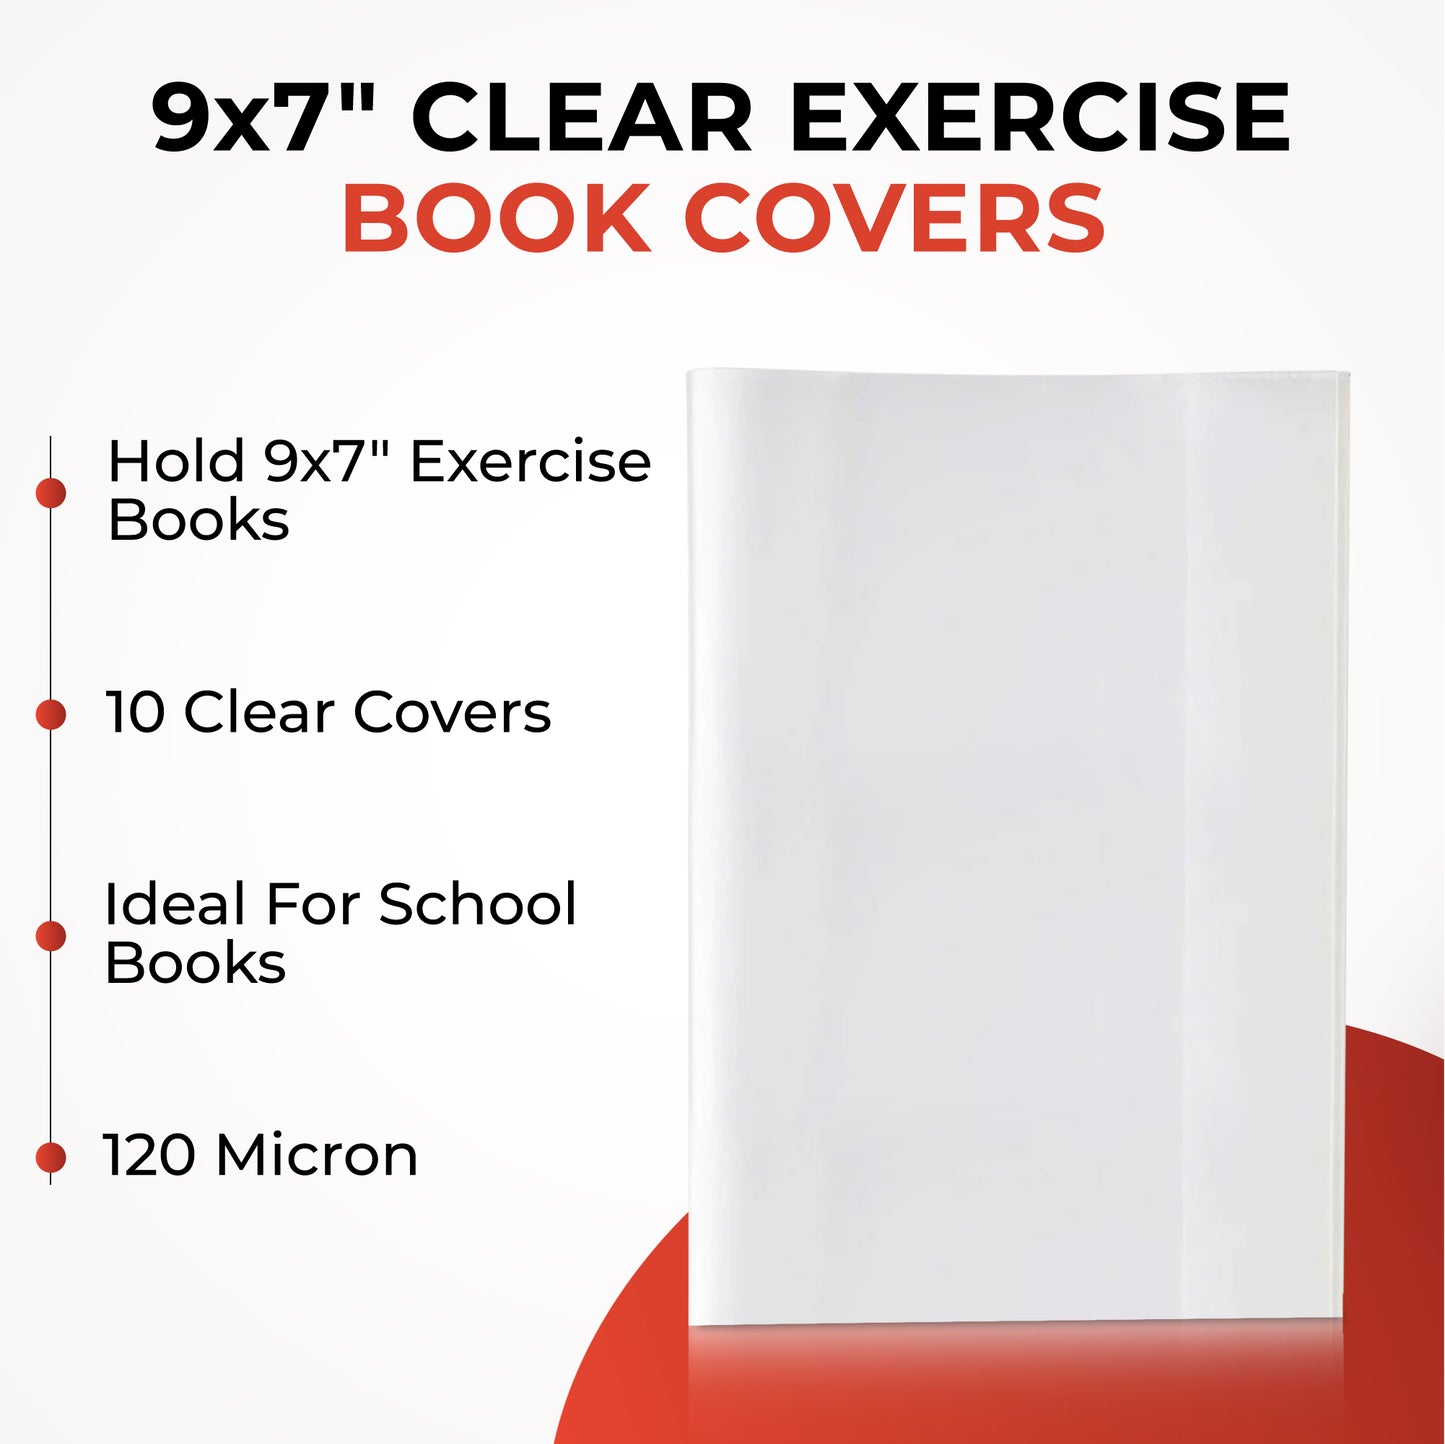 Pack of 10 9x7" Clear Exercise Book Covers by Janrax